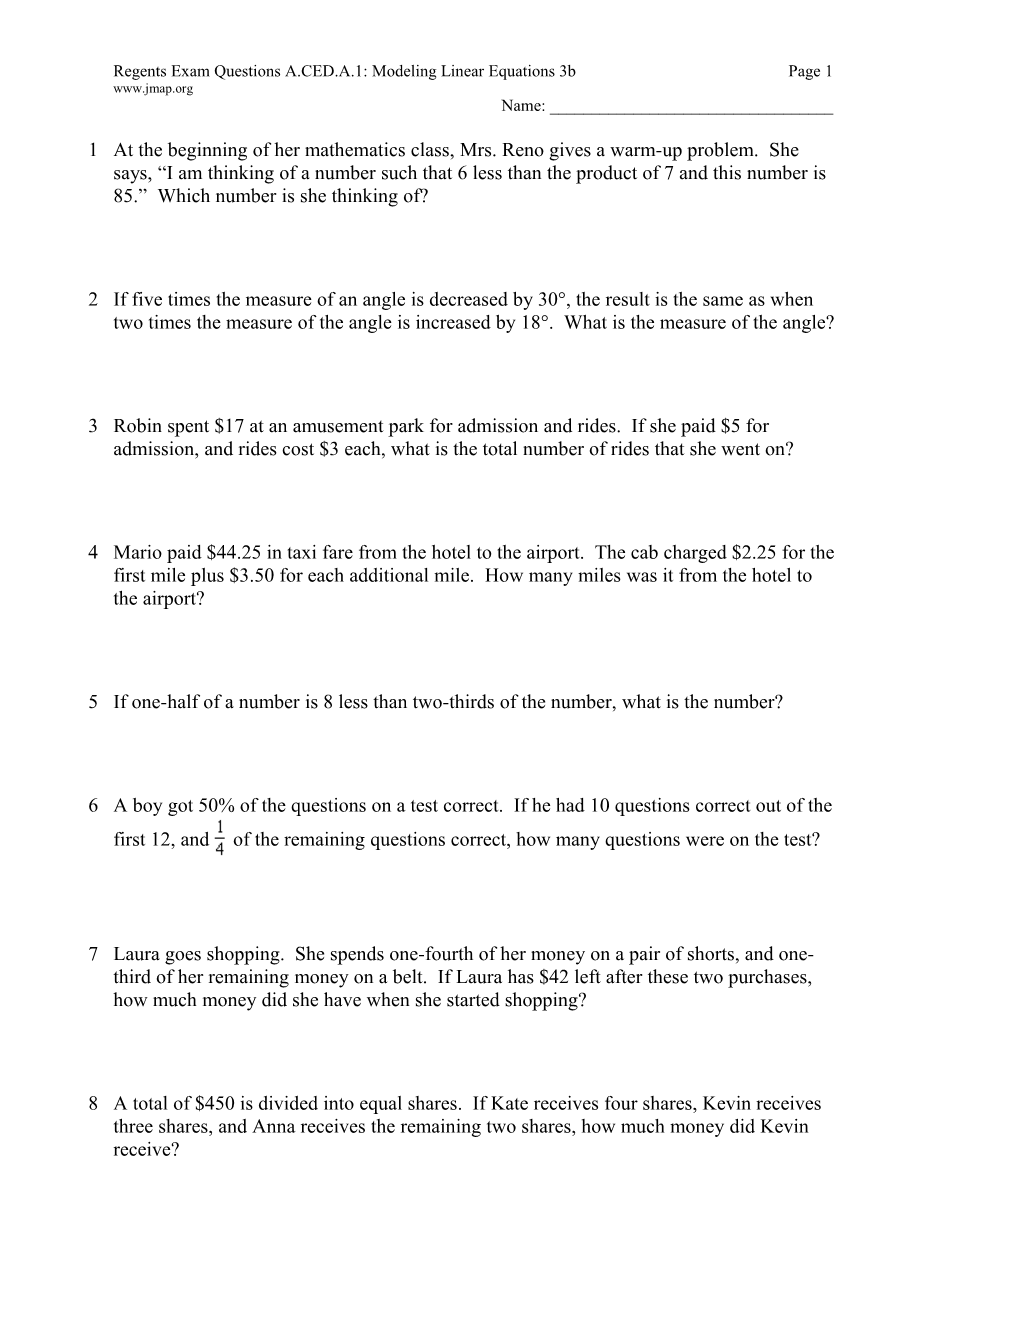 Regents Exam Questions A.CED.A.1: Modeling Linear Equations 3B Page 3